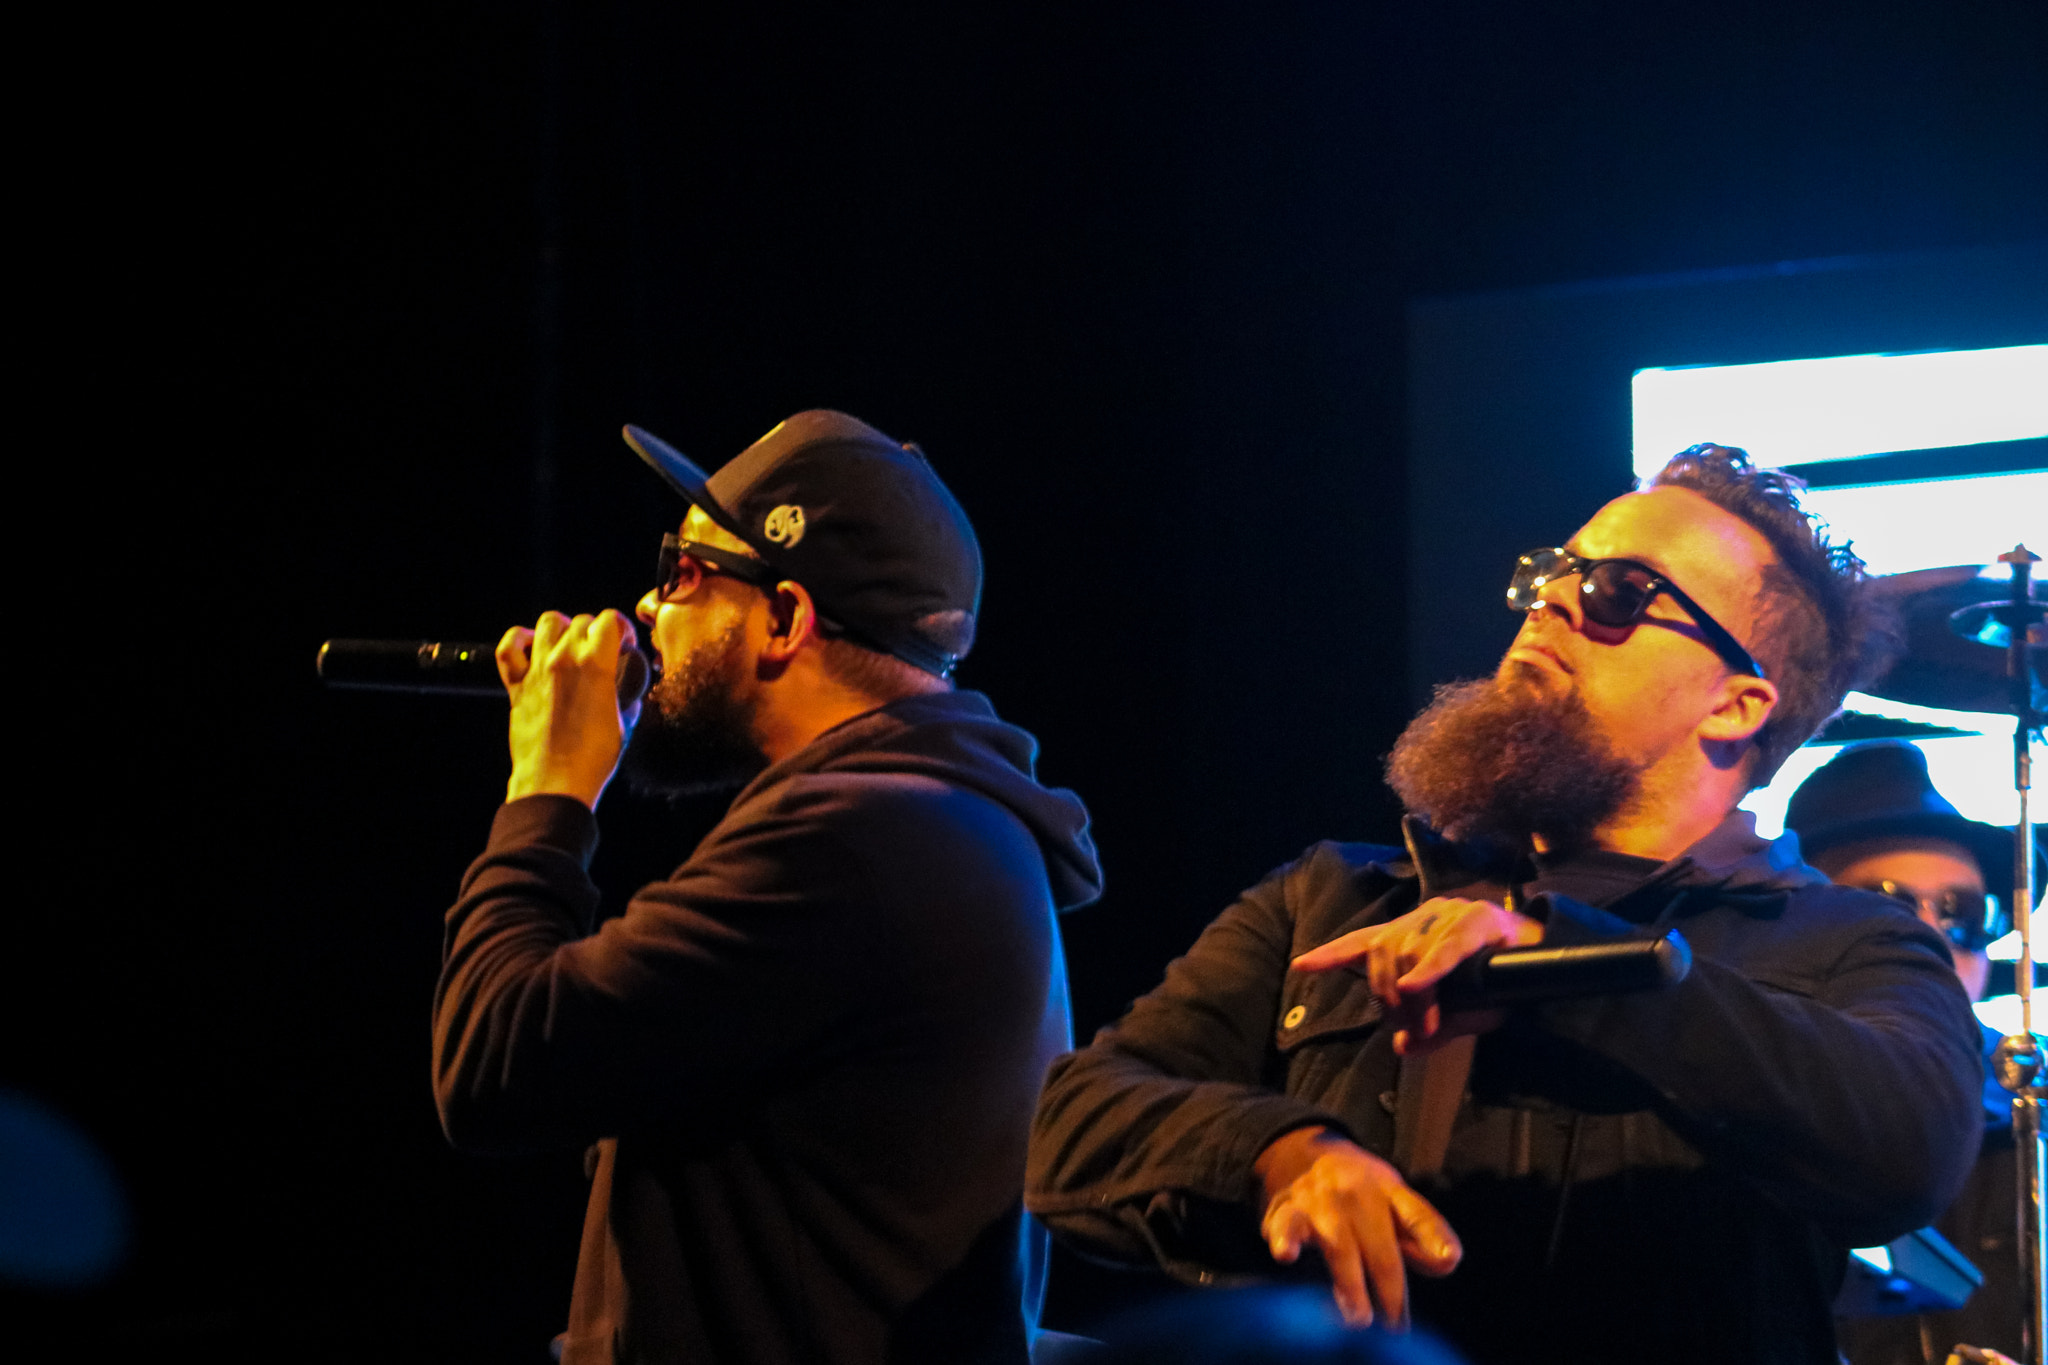 Canon EOS 750D (EOS Rebel T6i / EOS Kiss X8i) + EF75-300mm f/4-5.6 sample photo. Rap group ¡mayday! opened for common kings at the grenada on friday, feb 24. photography